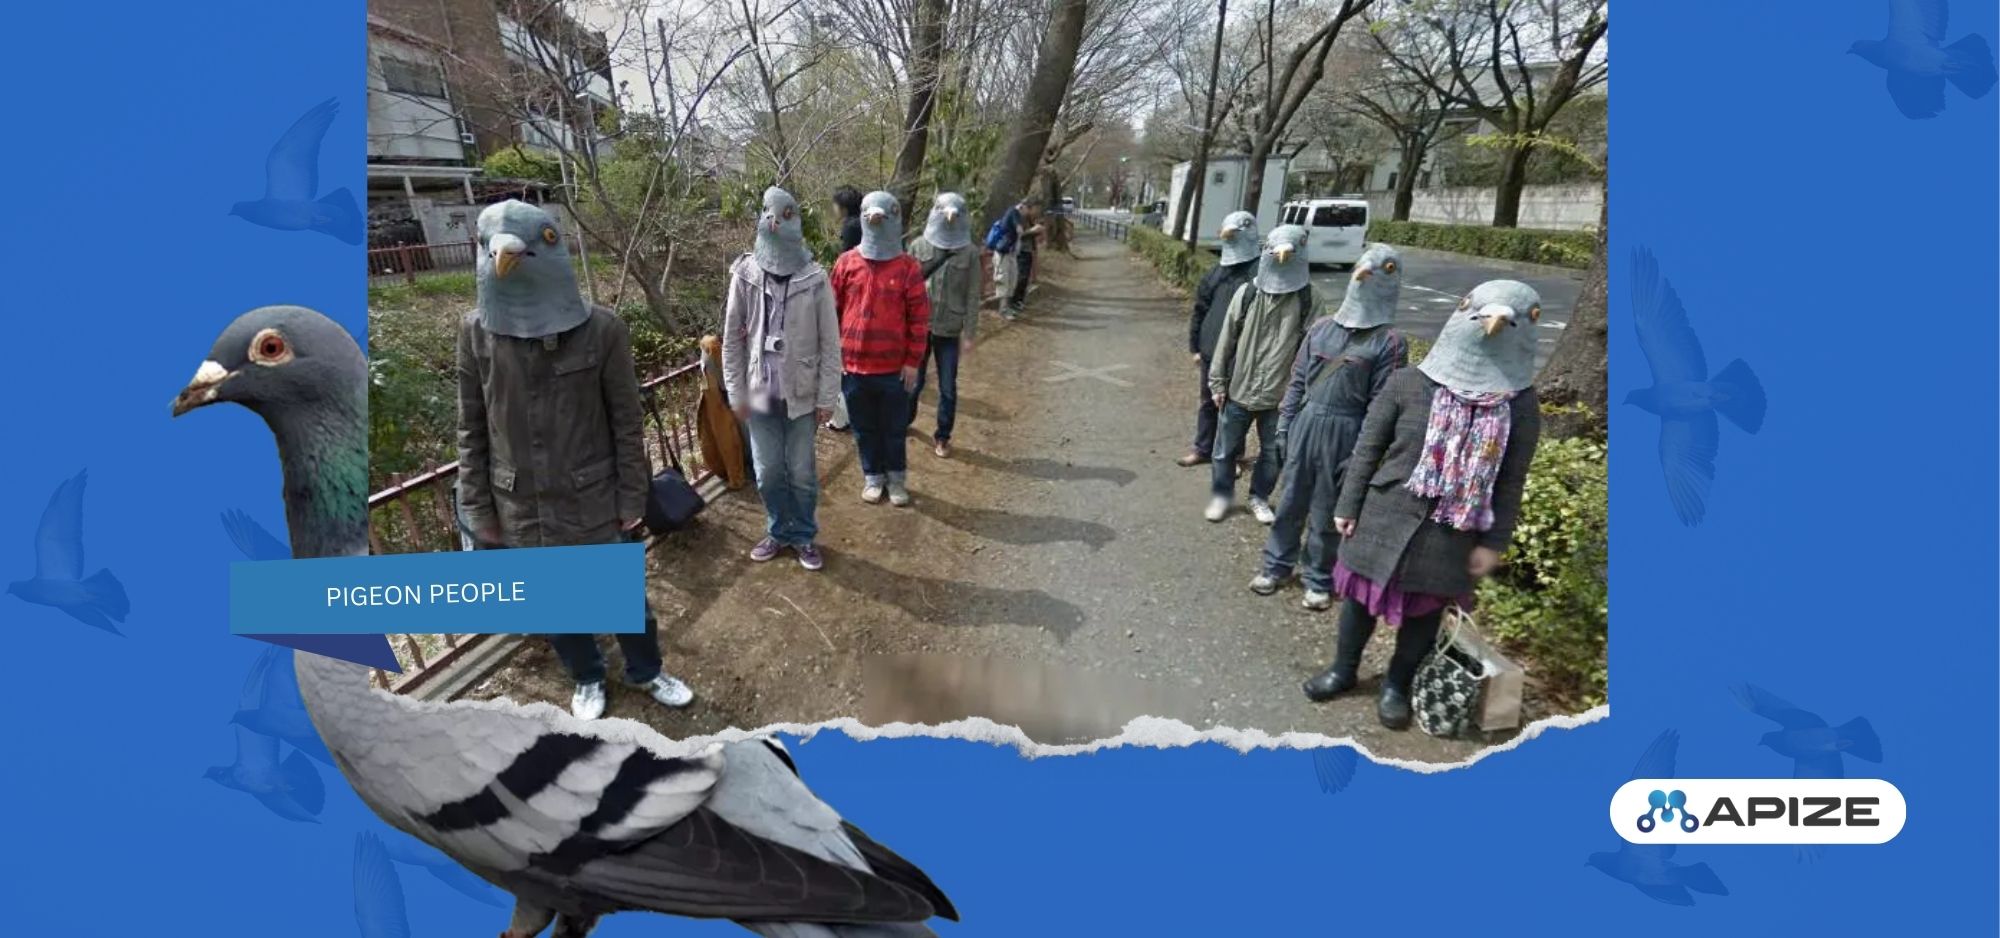 Image of the pigeon people on Google Maps.